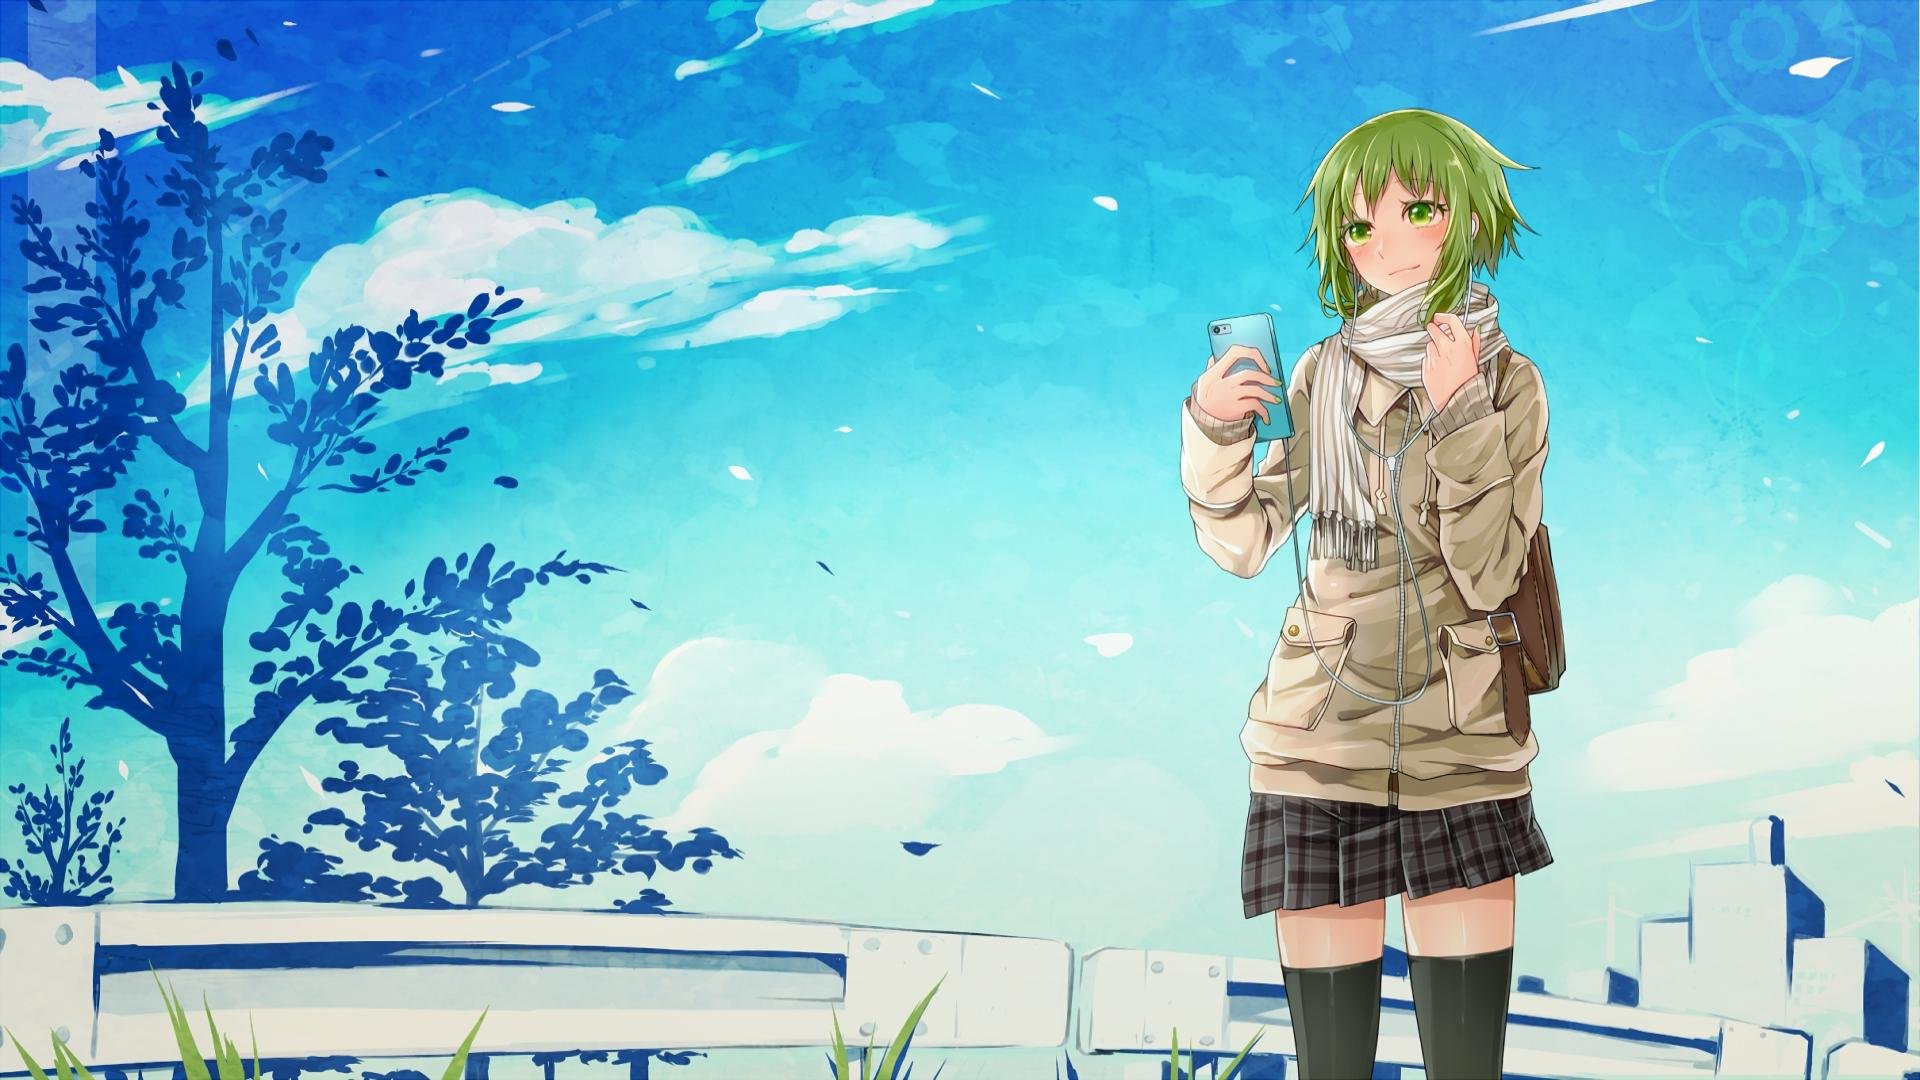 Awesome Gumi Vocaloid Free Wallpaper Id 1418 For Full Hd 1080p Desktop